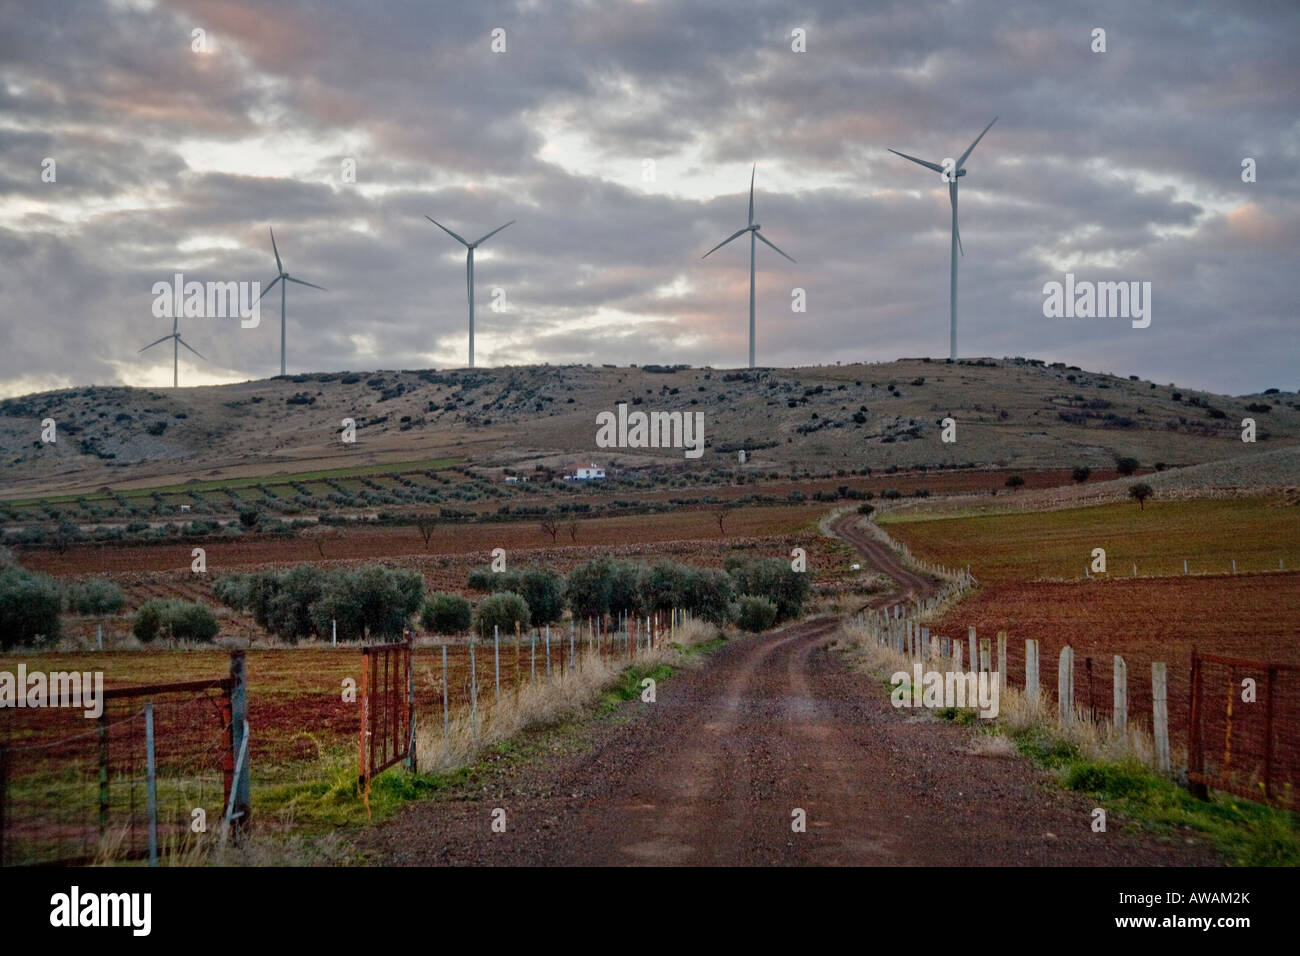 Wind driven electric generators contrast with an ancient country road in Central Spain Stock Photo